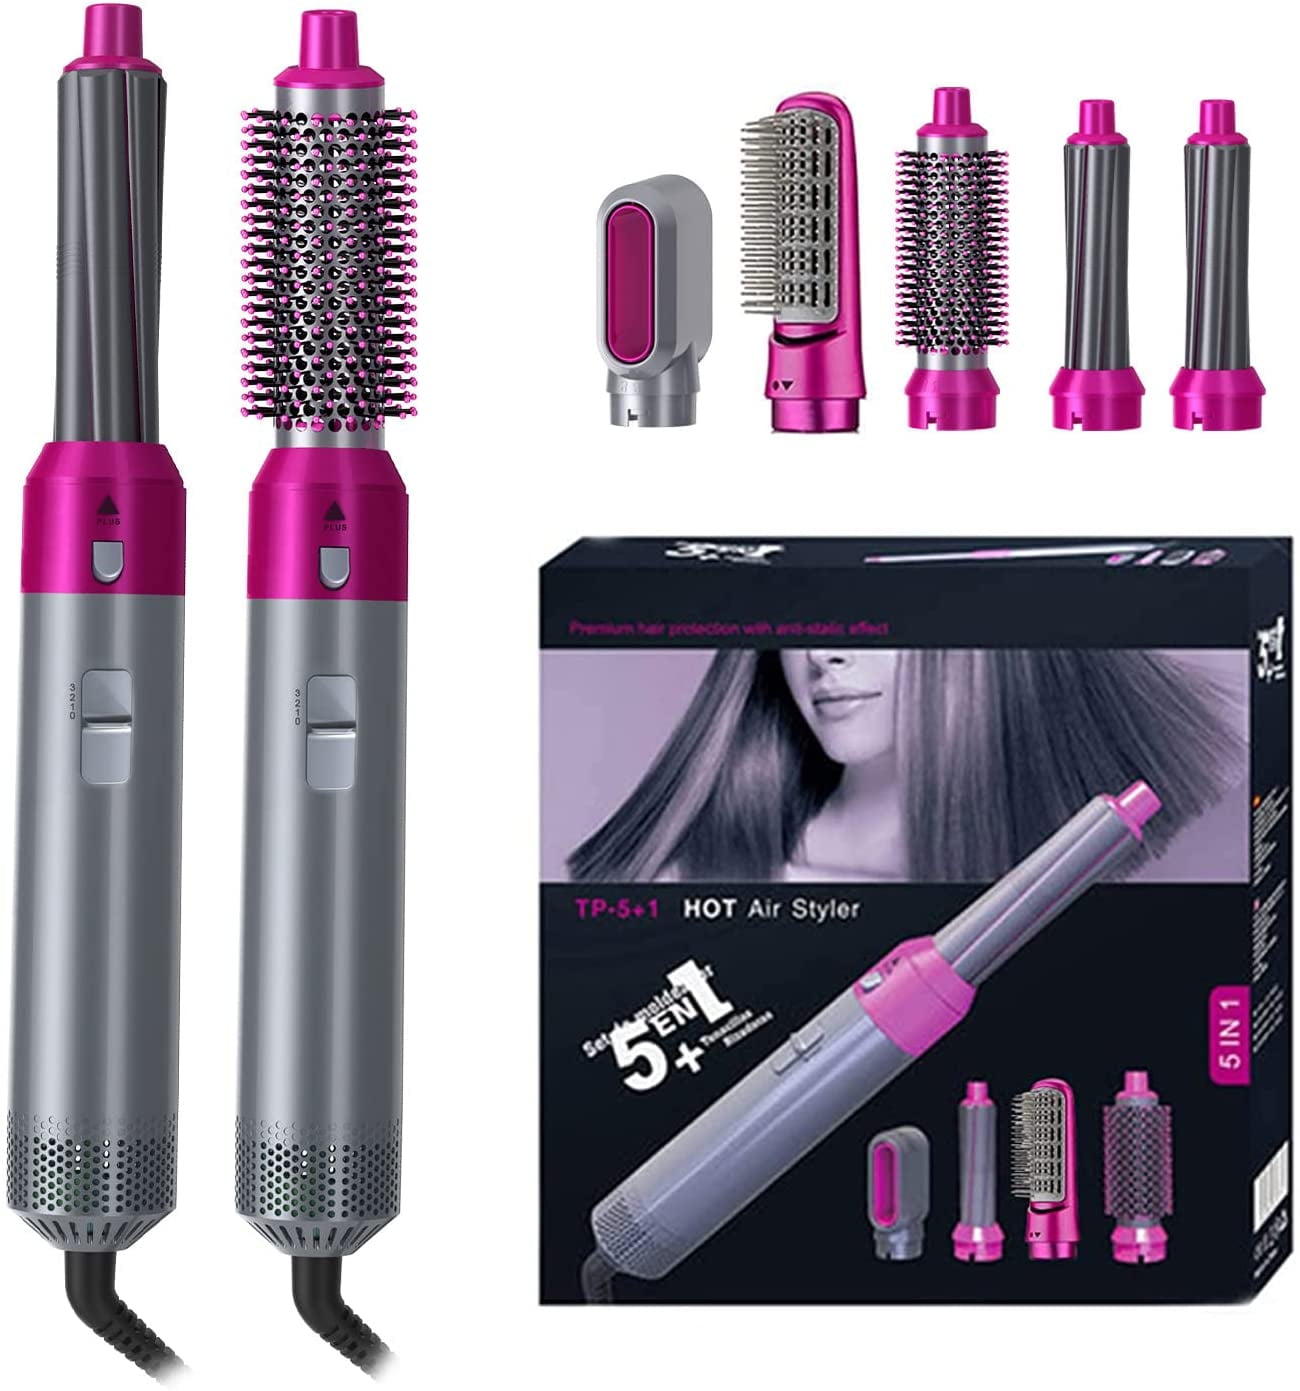 Versatile Styling Tool for All Hair Types - 5 in 1 Hair Dryer & Styling Comb